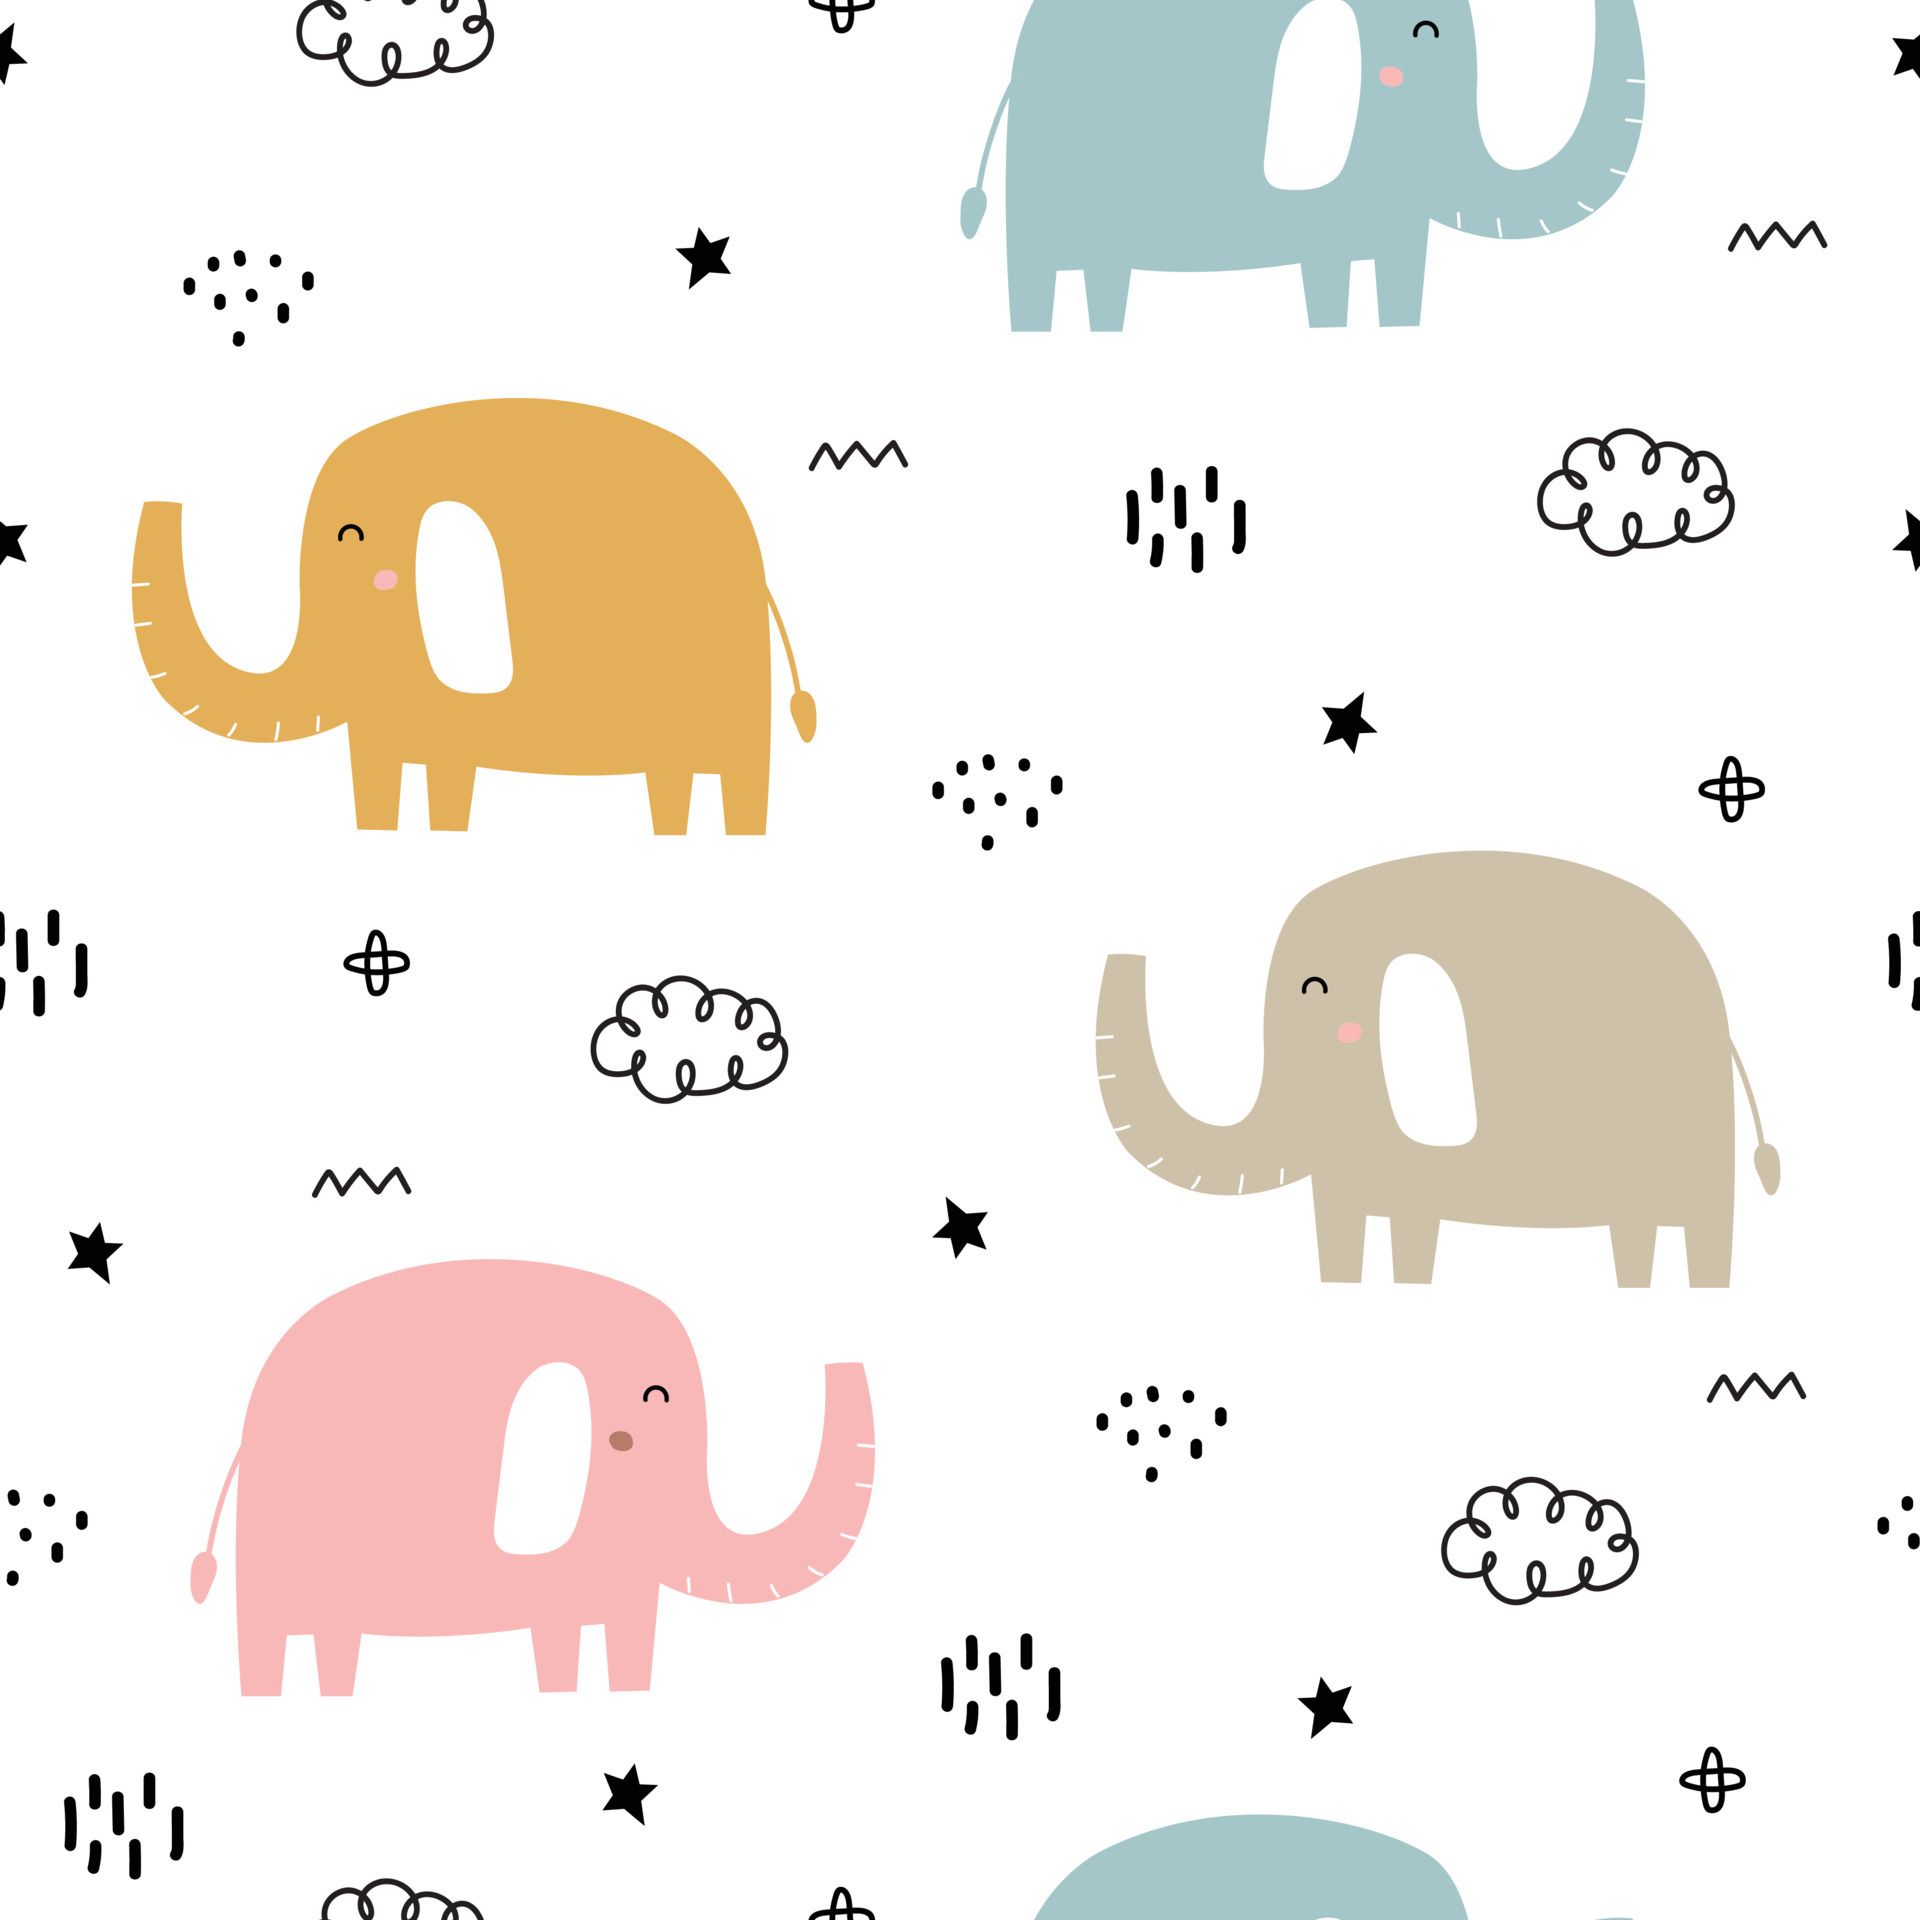 Little Elephant Seamless Pattern Cute Cartoon Animal Background Hand Drawn In Children's Style Used For Fabric, Textile, Print, Decorative Wallpaper. Vector Illustration